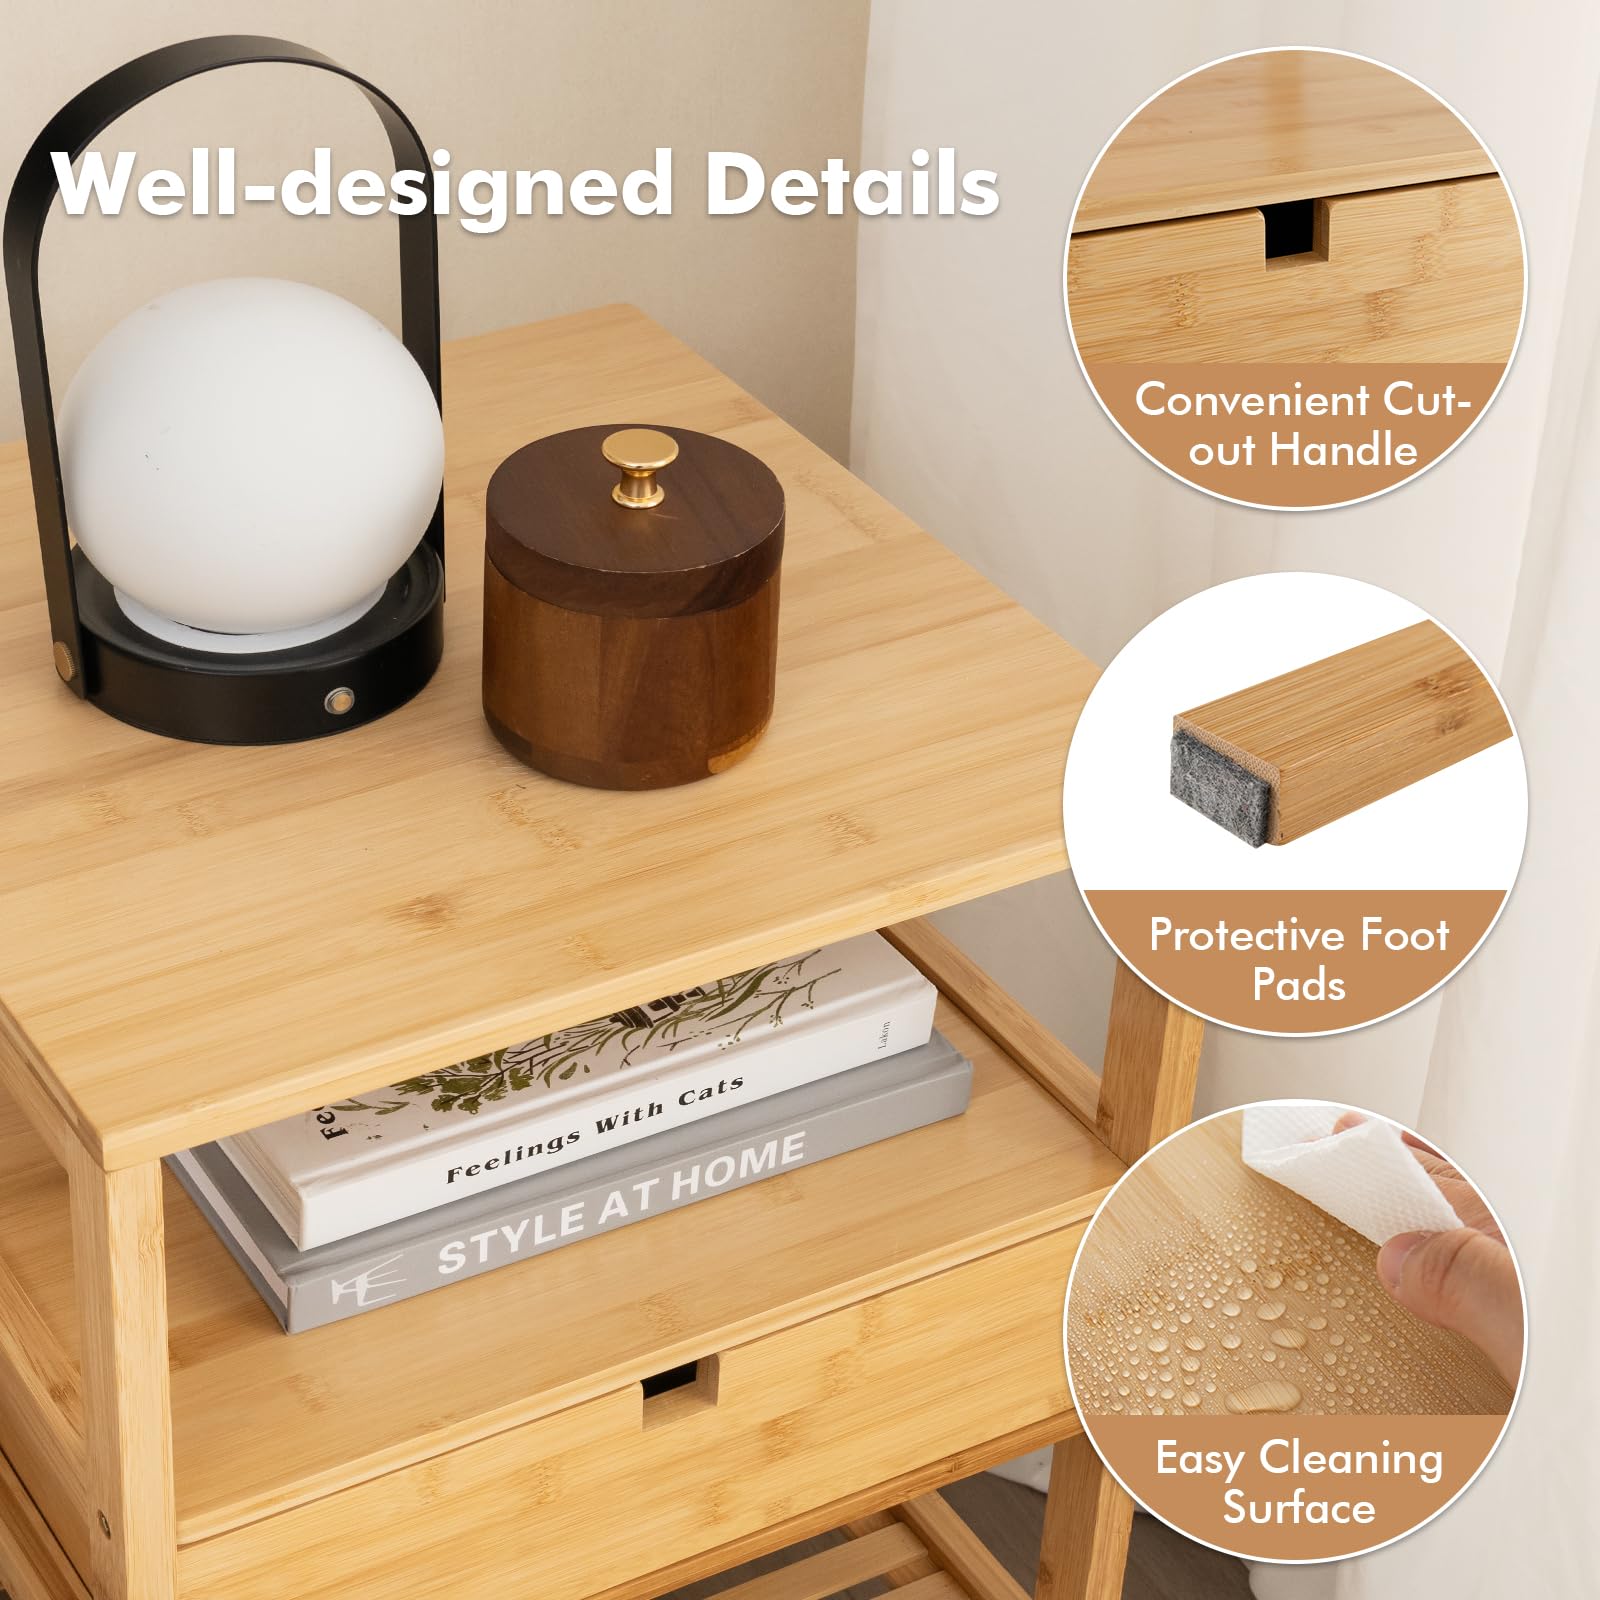 Giantex Nightstand Set of 2, Bamboo End Table with Drawer and 2 Open Shelves